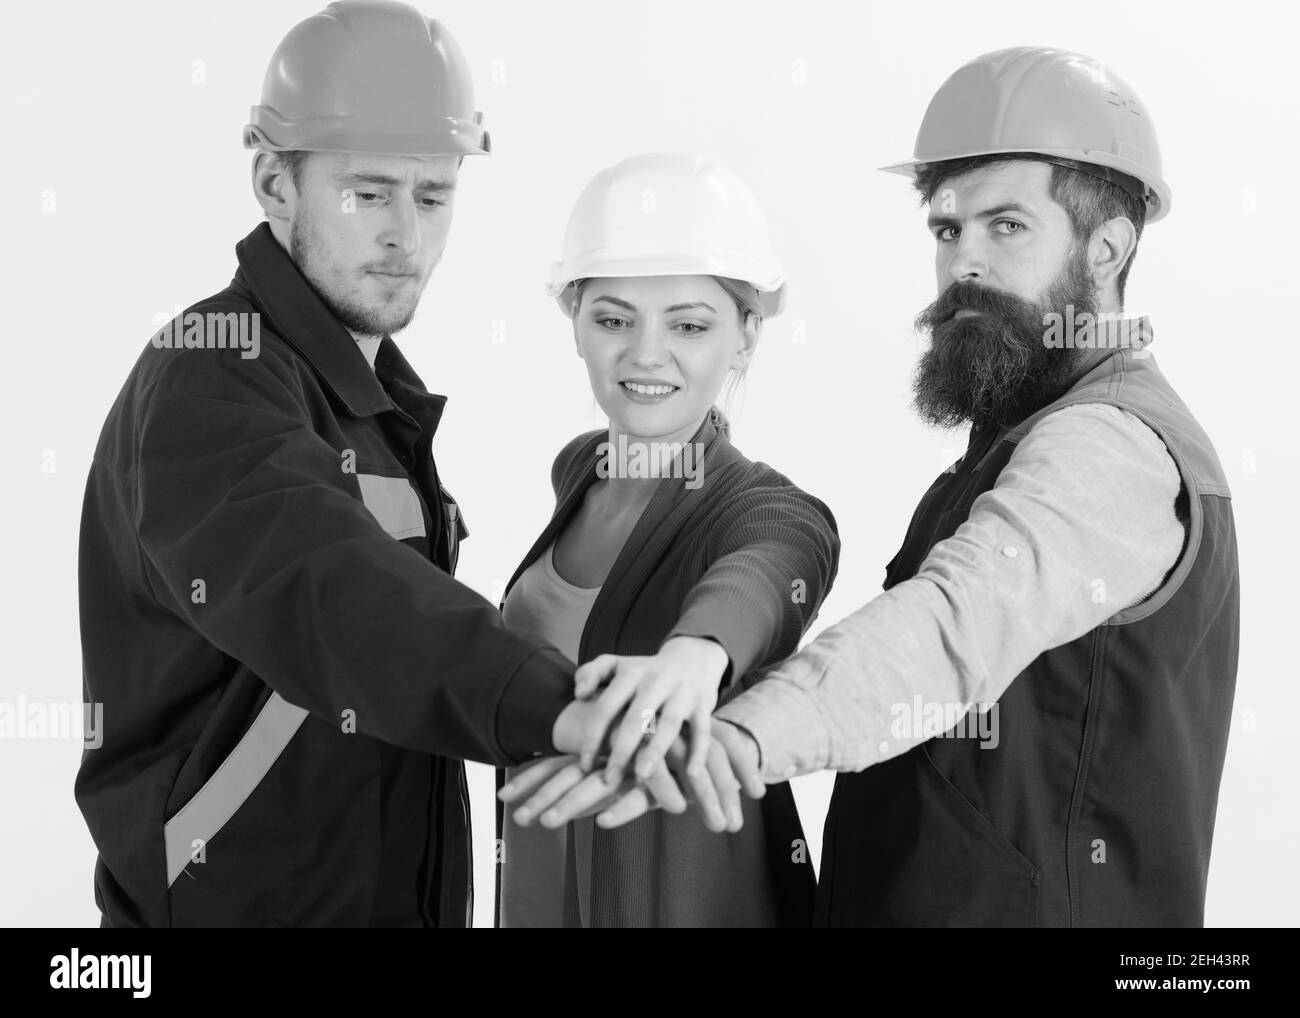 Builders hat, isolated Black and White Stock Photos & Images - Alamy